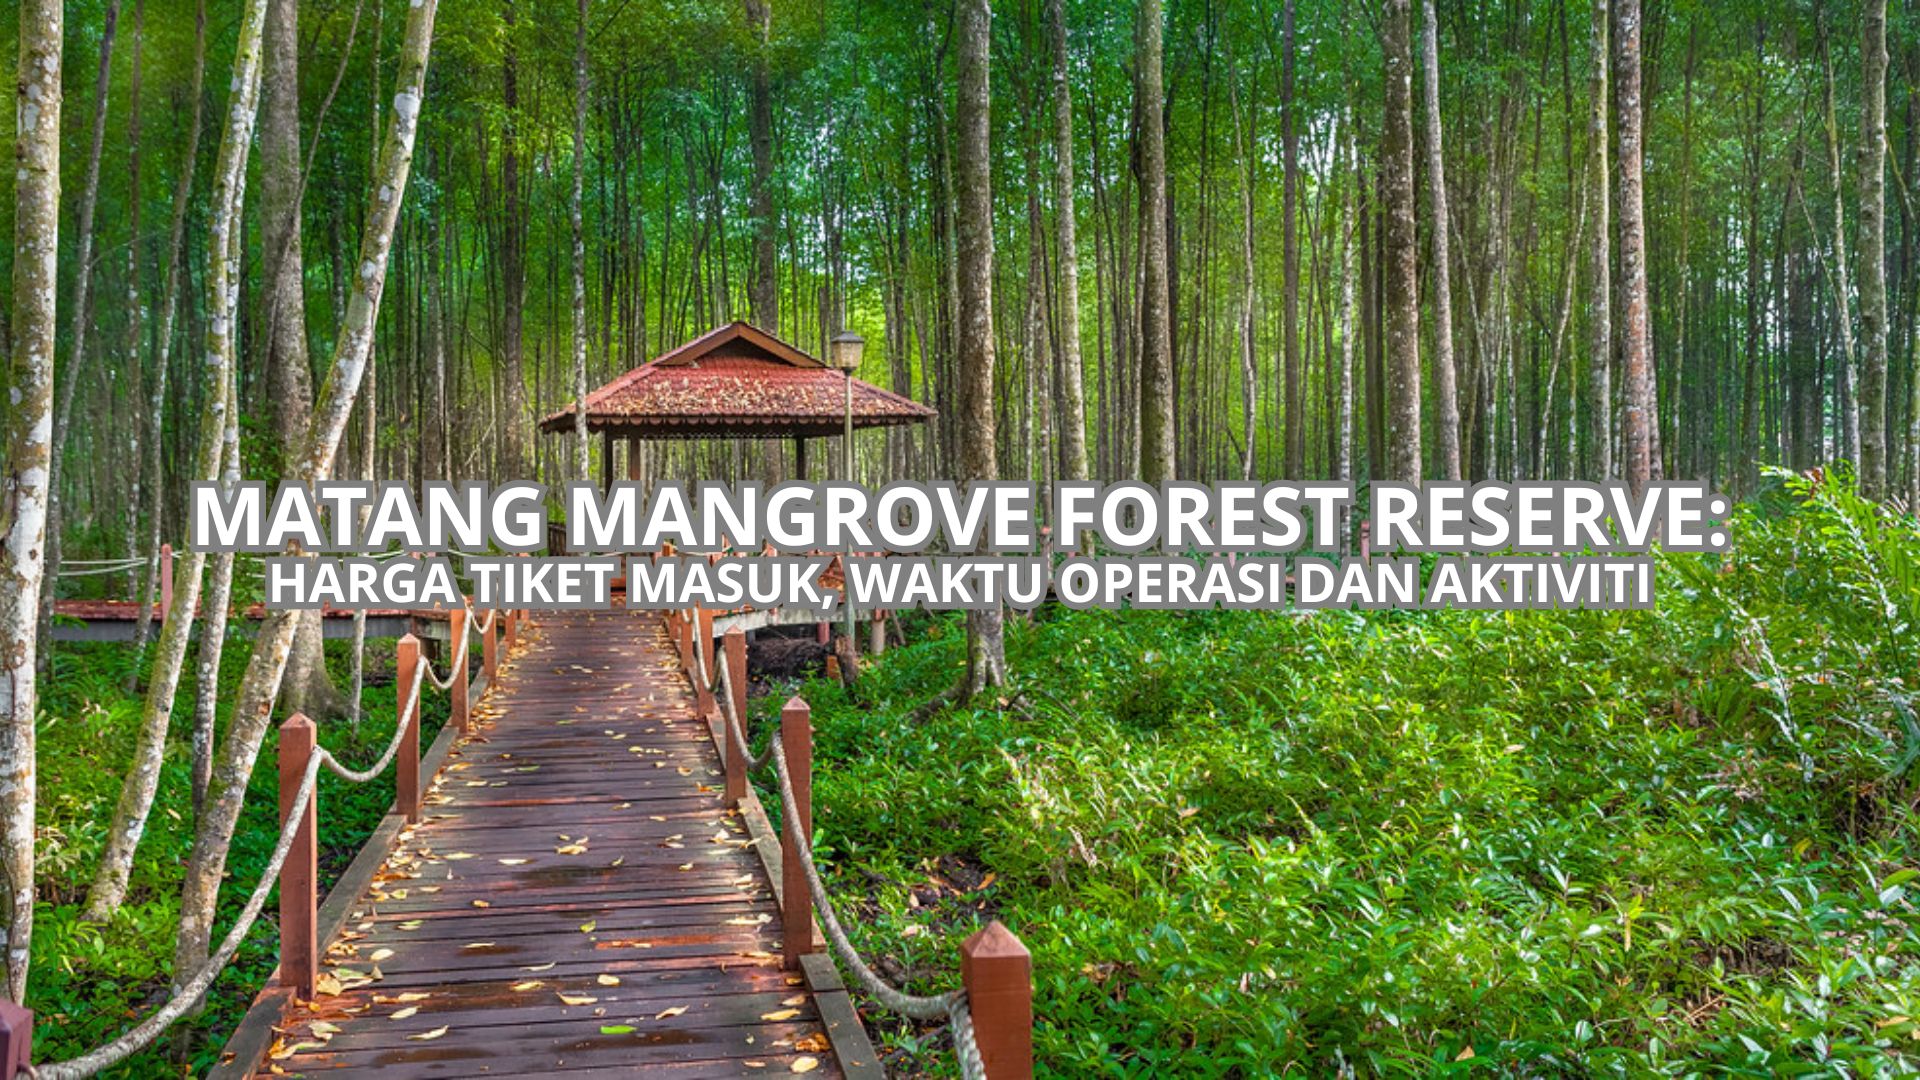 Matang Mangrove Forest Reserve Cover